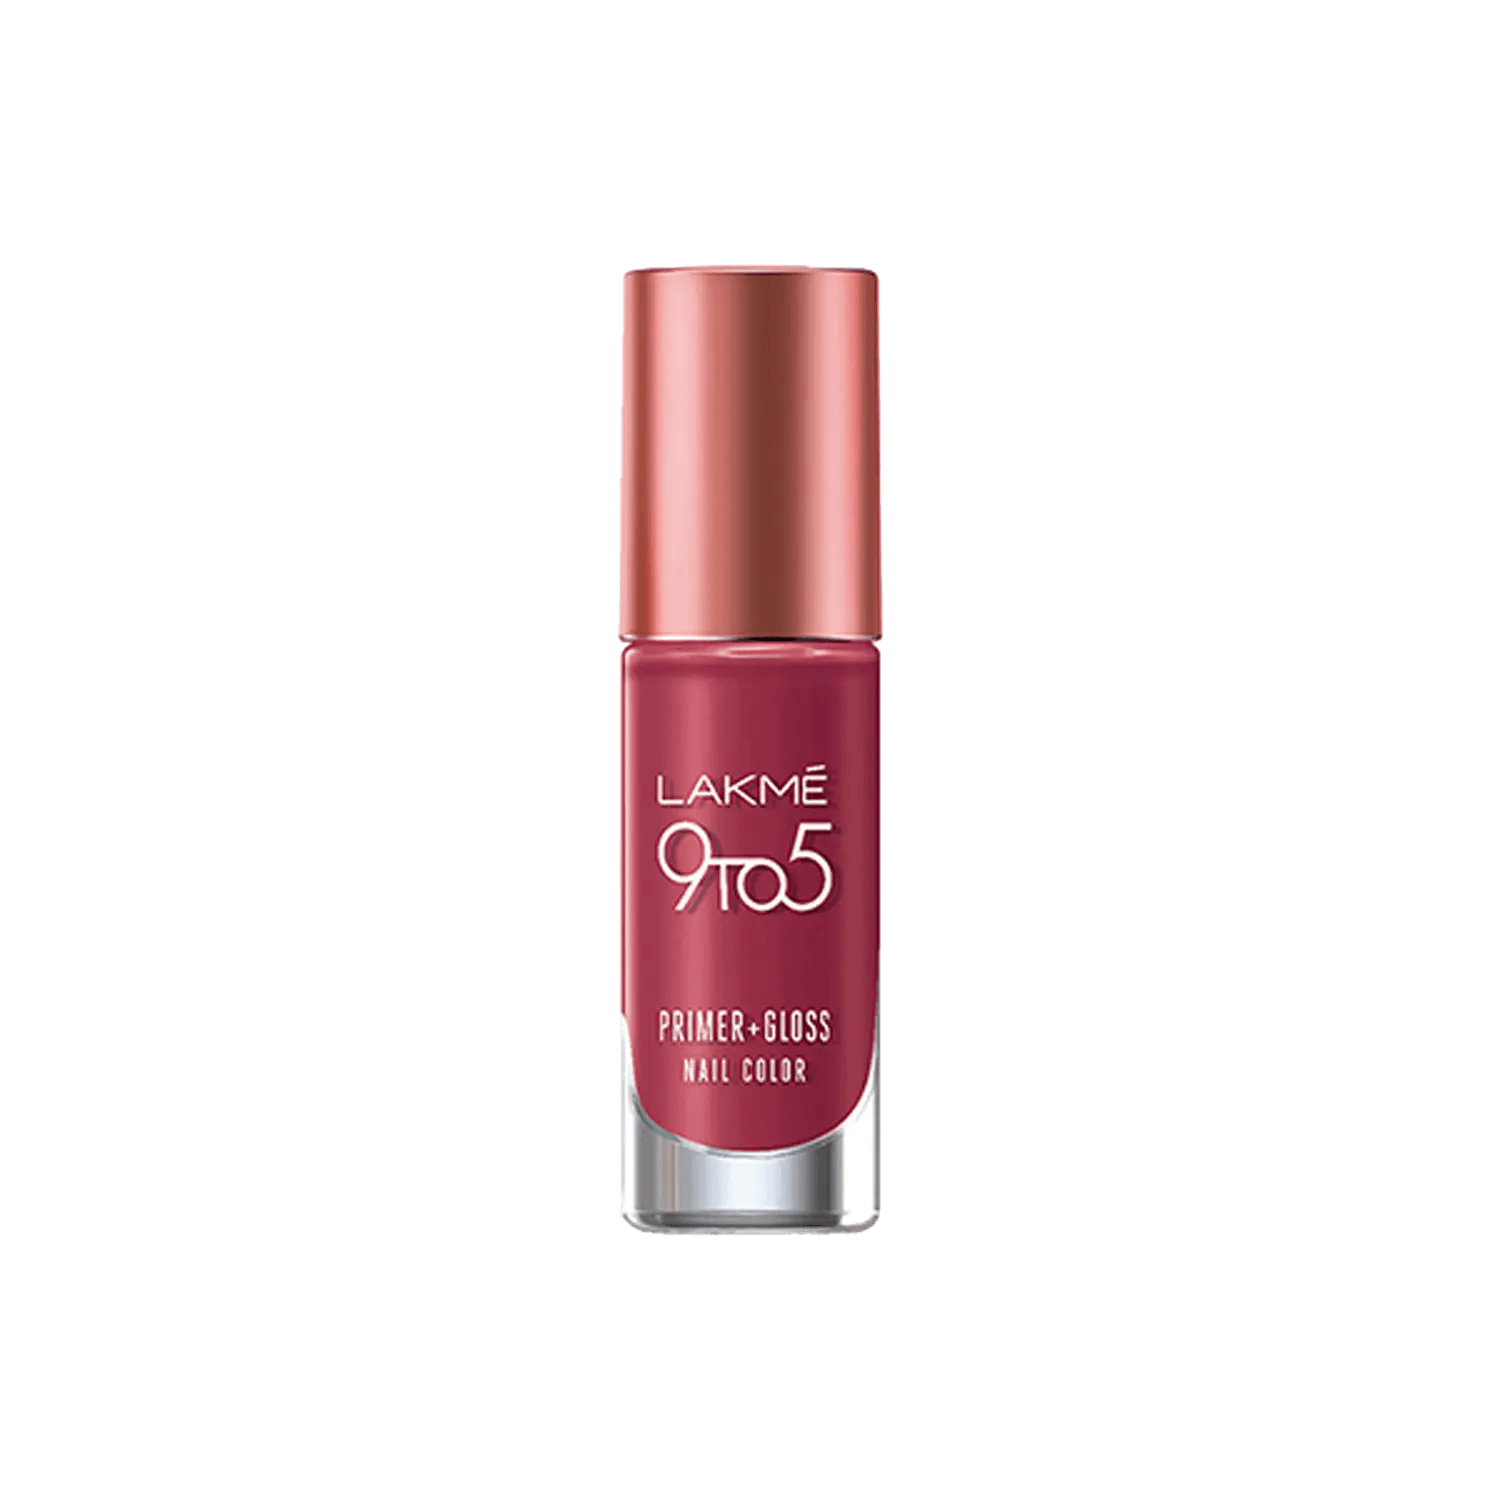 Lakme | Lakme 9To5 Primer + Gloss Nail Color - Berry Business (6ml)